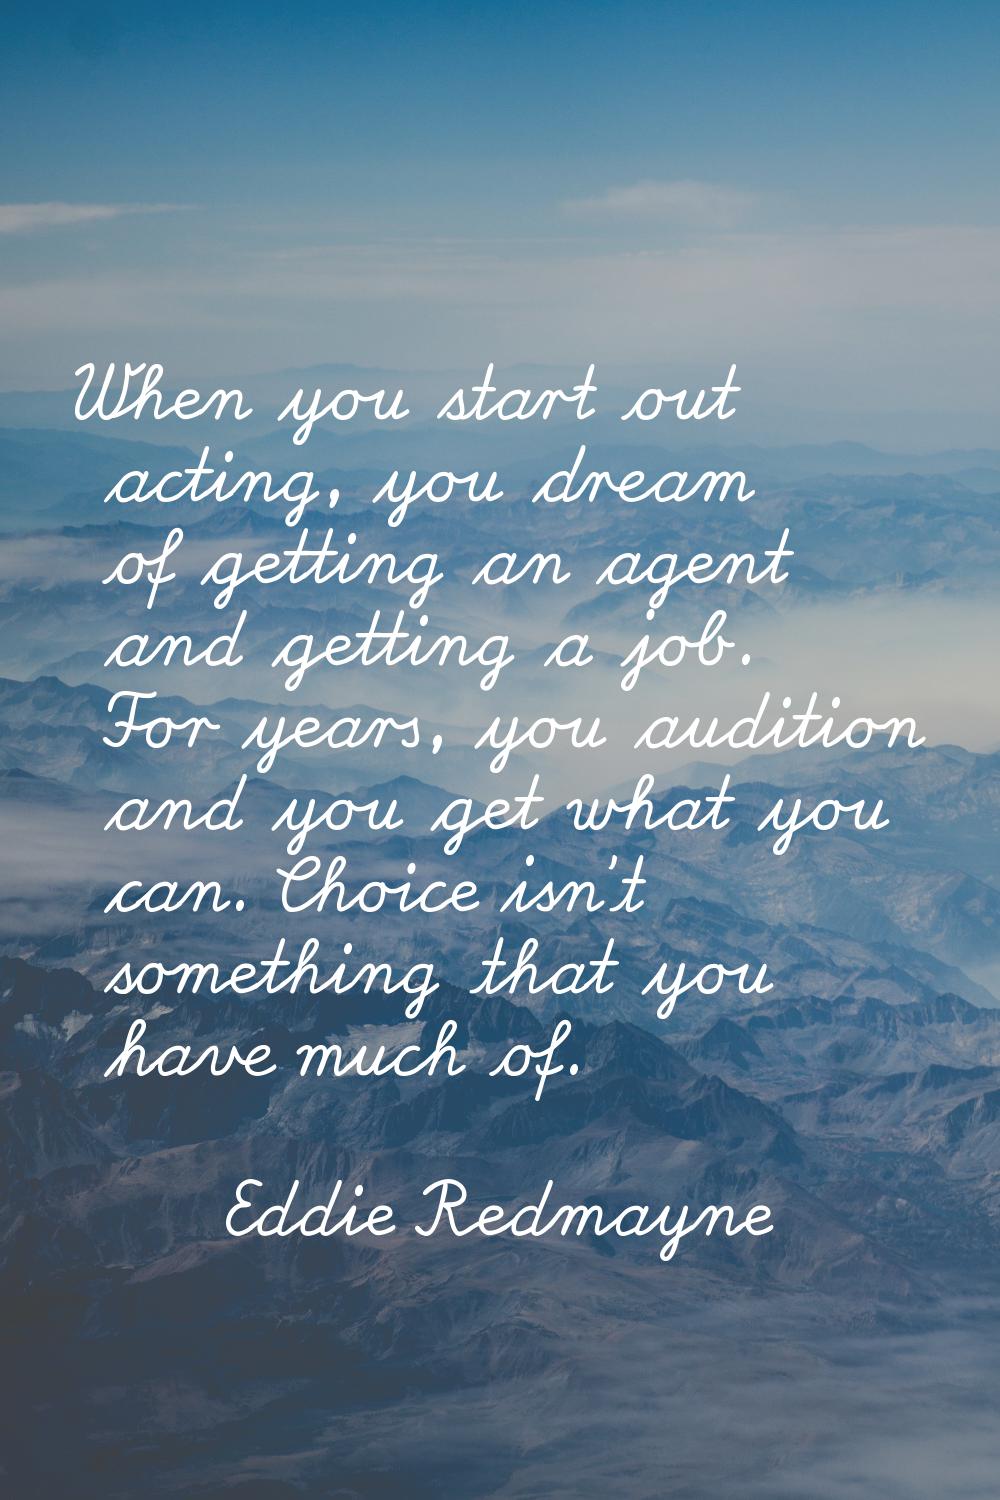 When you start out acting, you dream of getting an agent and getting a job. For years, you audition